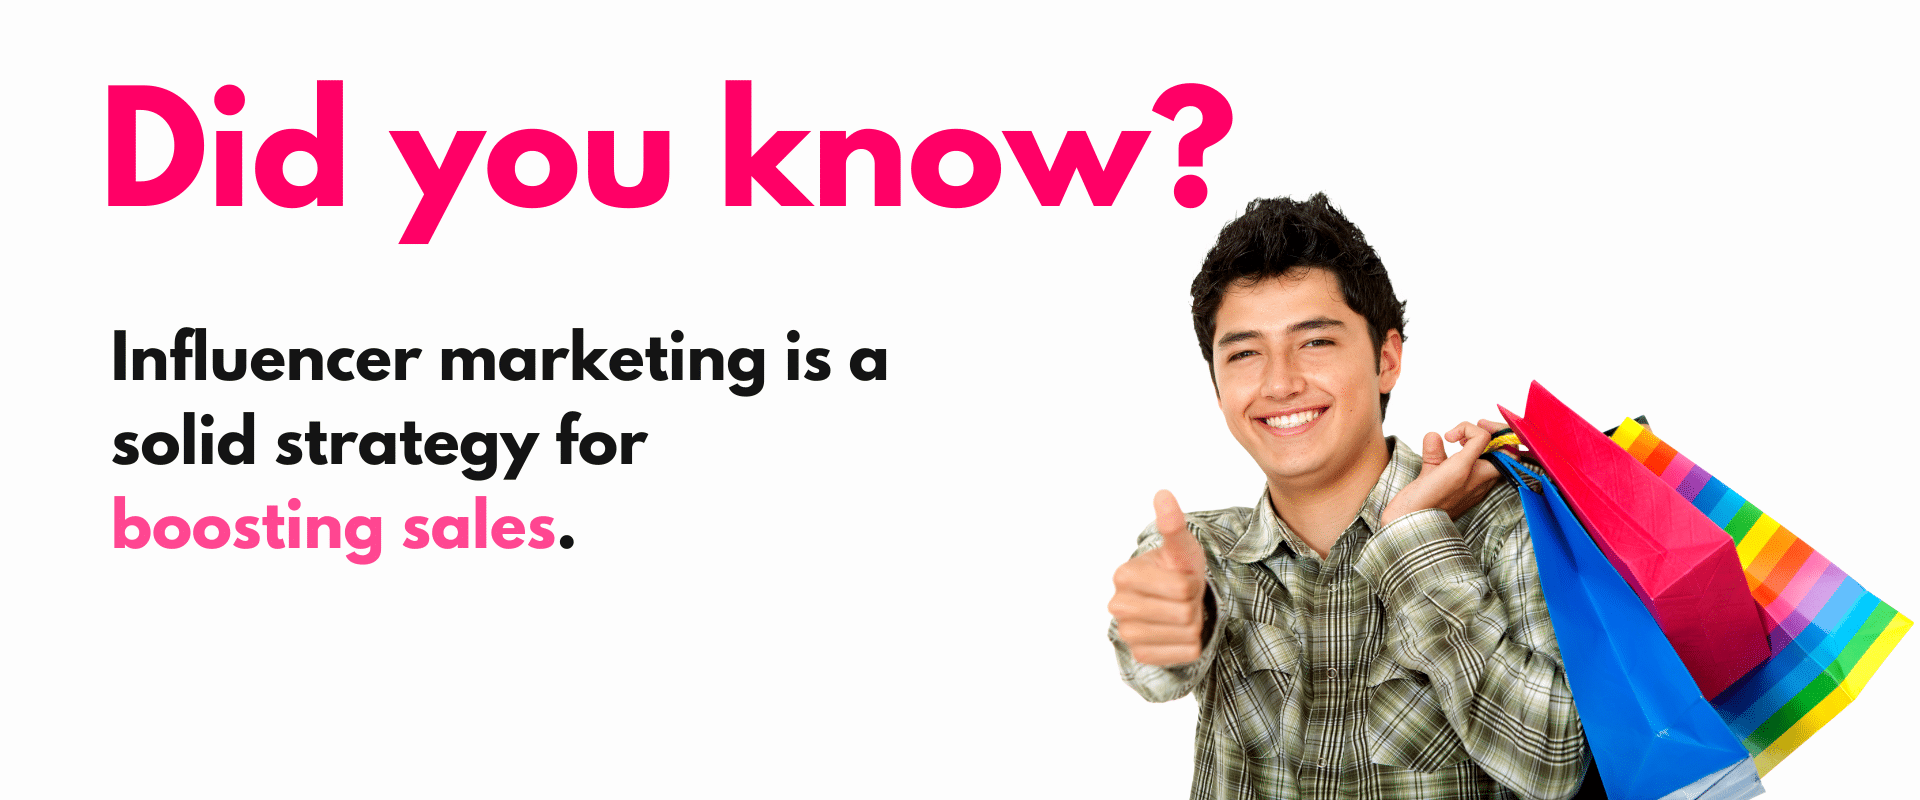 Influence marketing is a solid strategy for boosting sales.